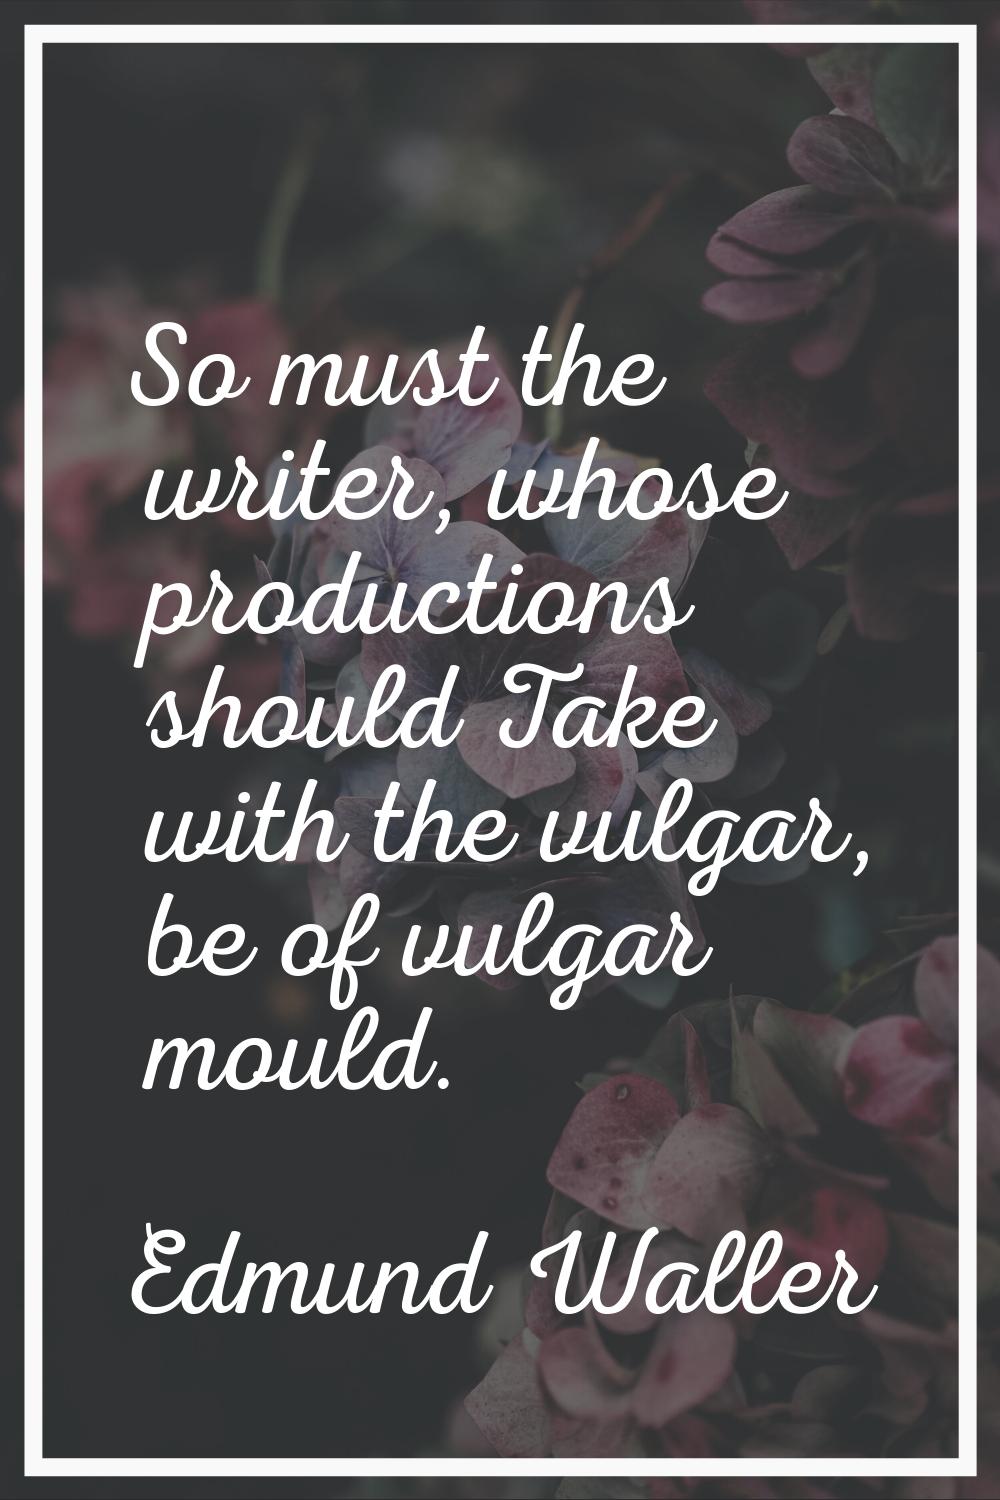 So must the writer, whose productions should Take with the vulgar, be of vulgar mould.